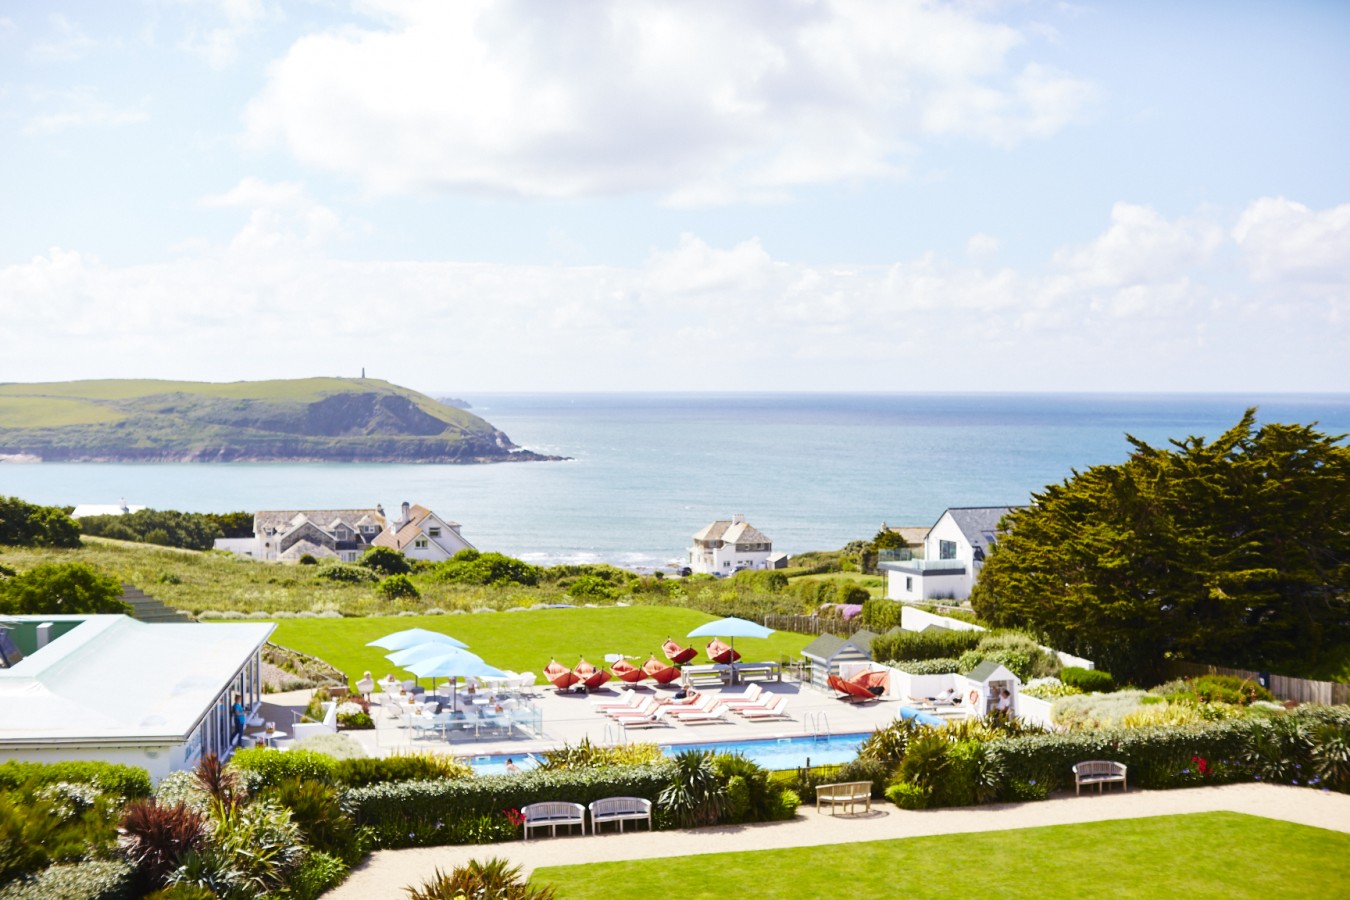 We Check In to St Moritz Hotel and Spa - A Cowshed Retreat on the Cornish Coast